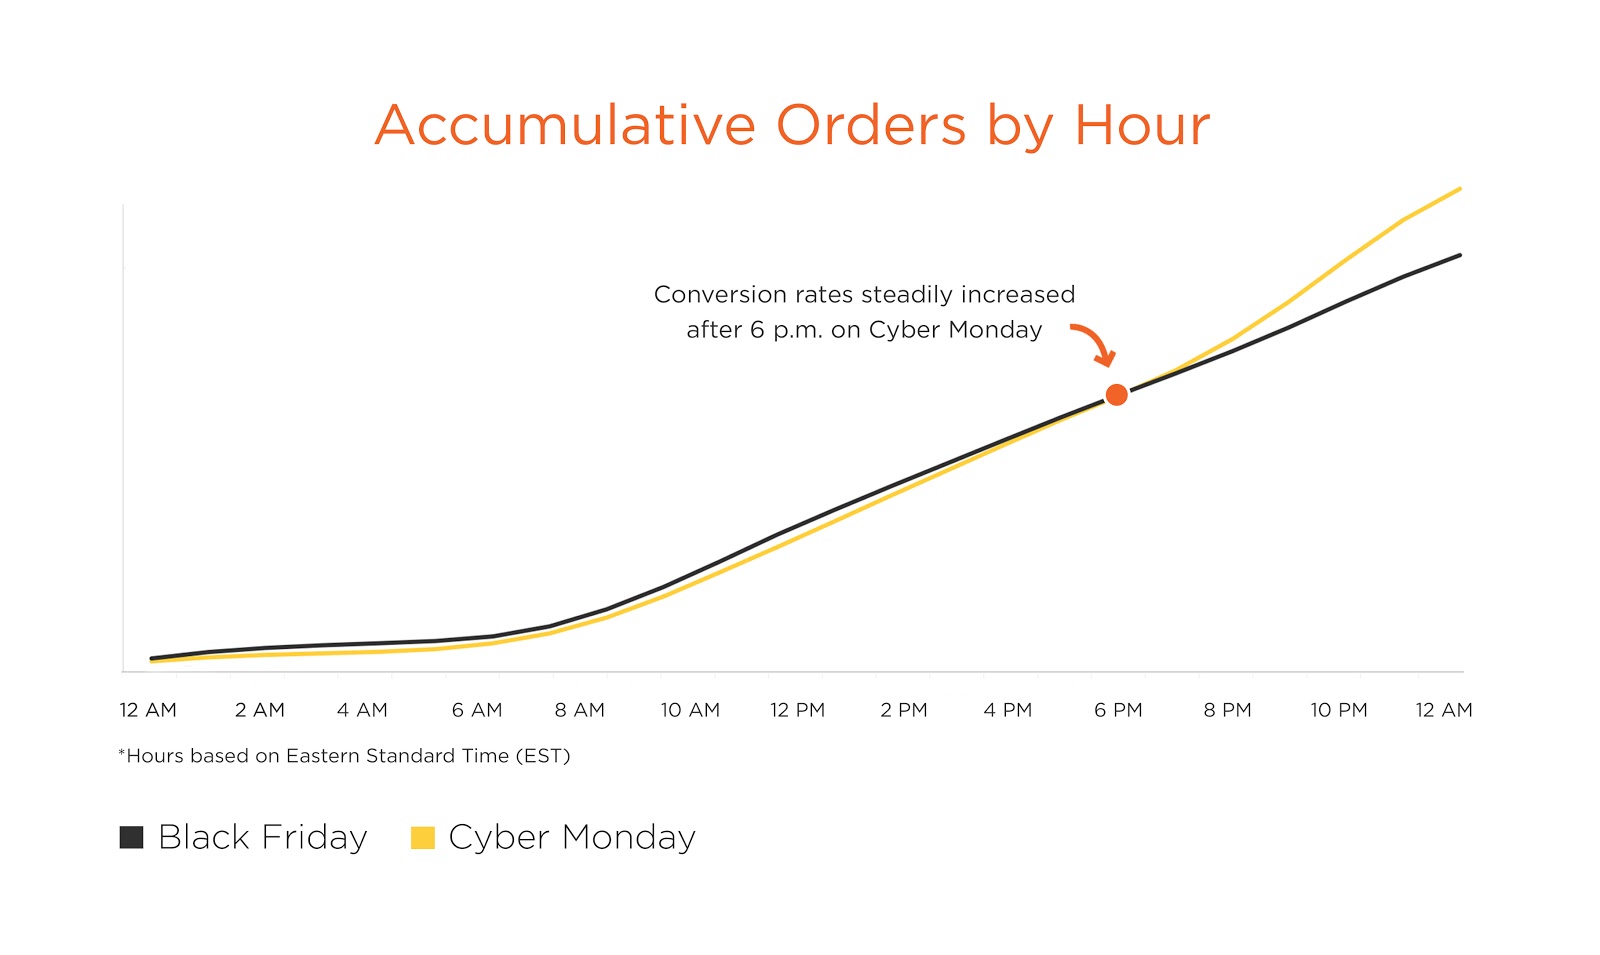 Black Friday and Cyber Monday Accumulative Orders by Hour